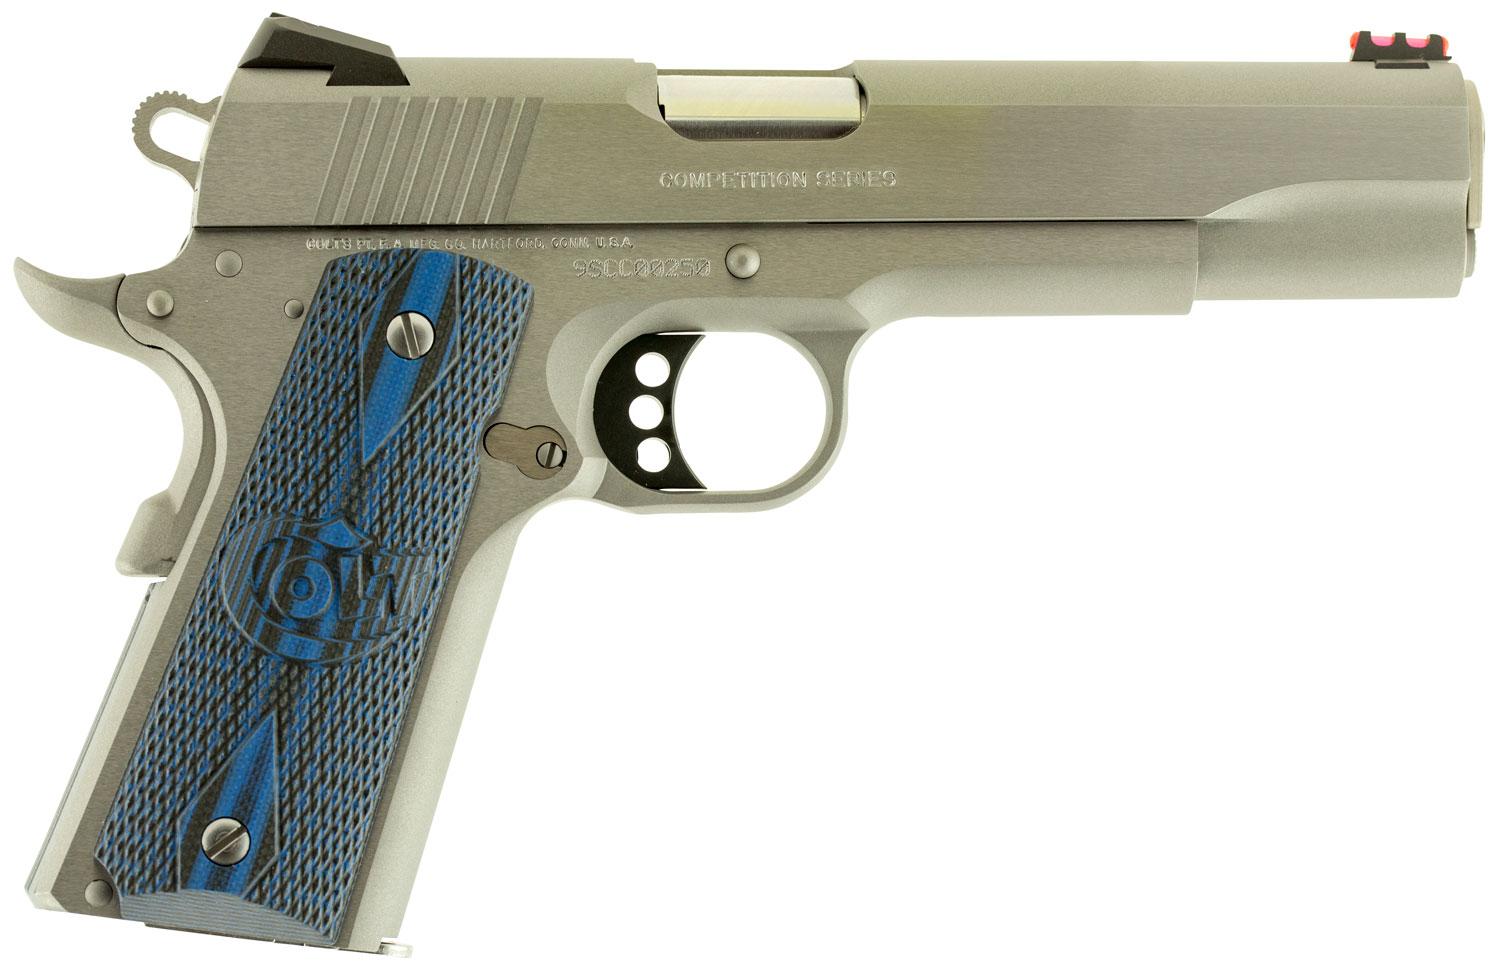  Colt O1082ccs Compet 9mm 5in 9rd Ss